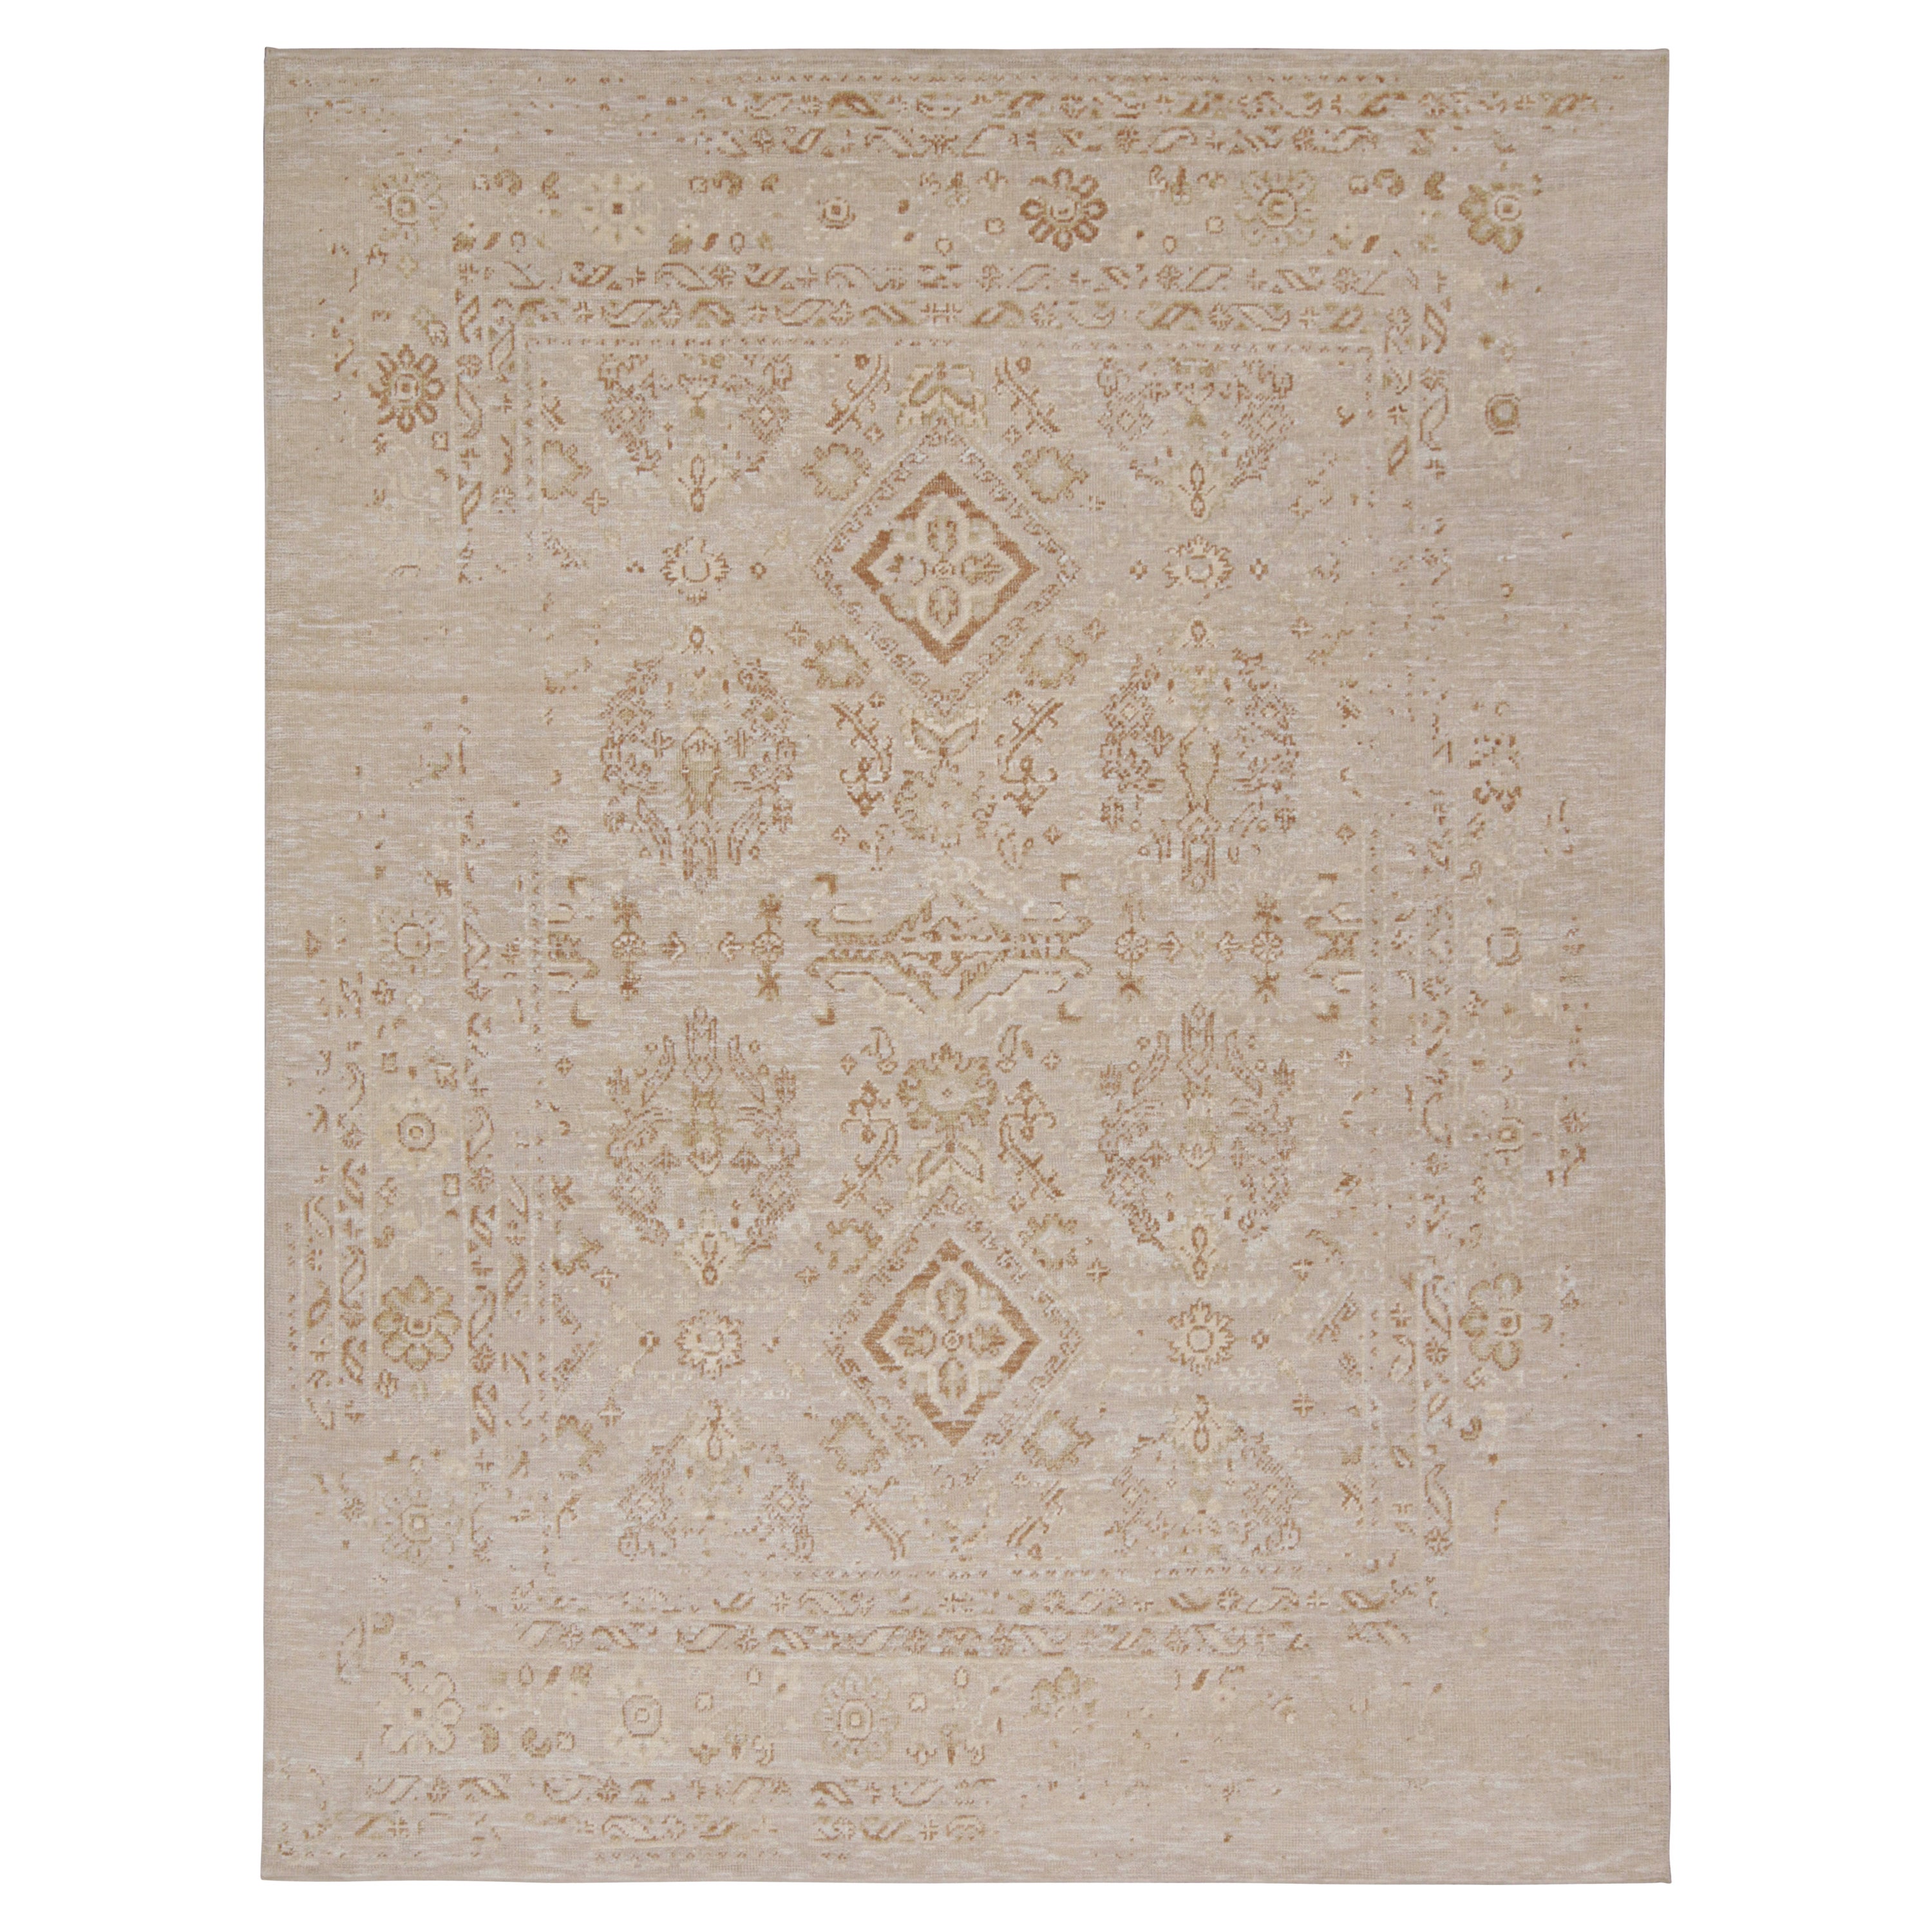 Rug & Kilim’s Oushak Style Rug in Beige-Brown Geometric Patterns For Sale